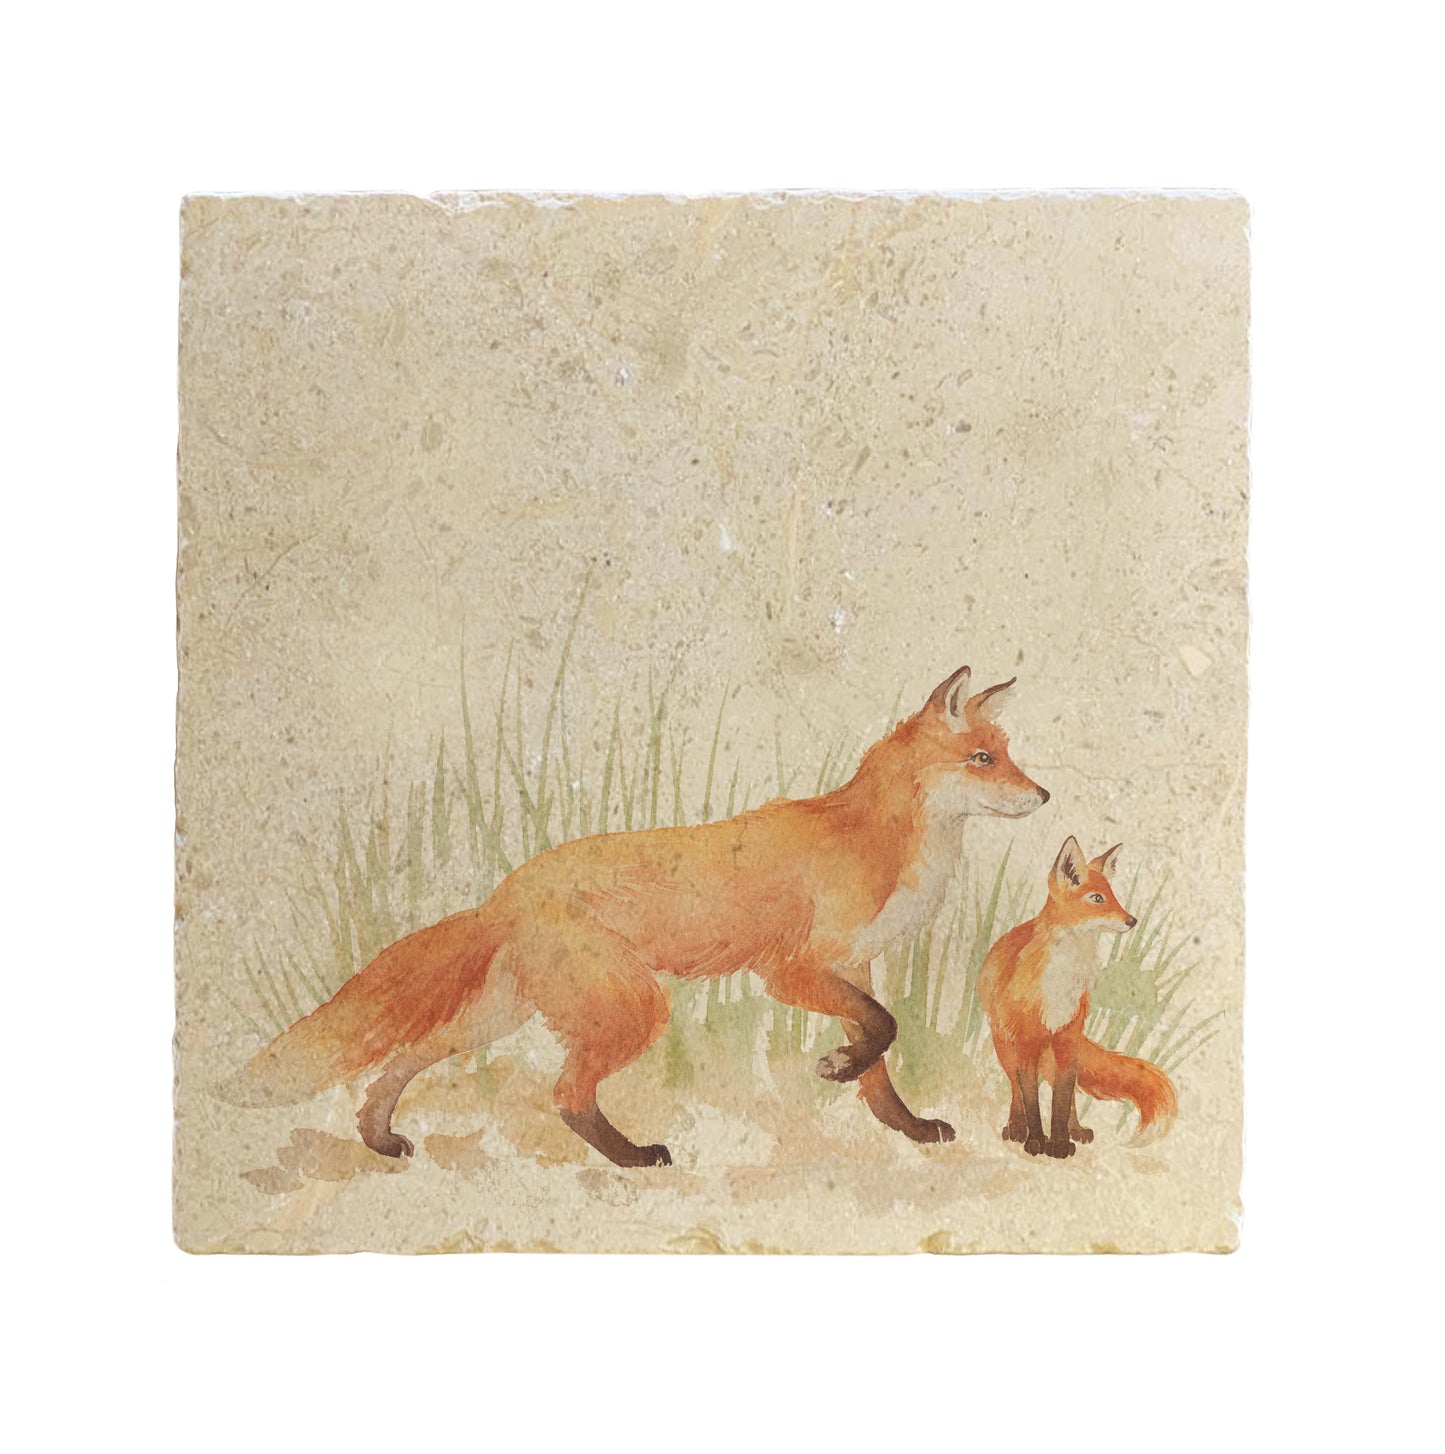 A handmade square cream marble splashback tile featuring a watercolour countryside animal design of a fox and her fox cub in grass.